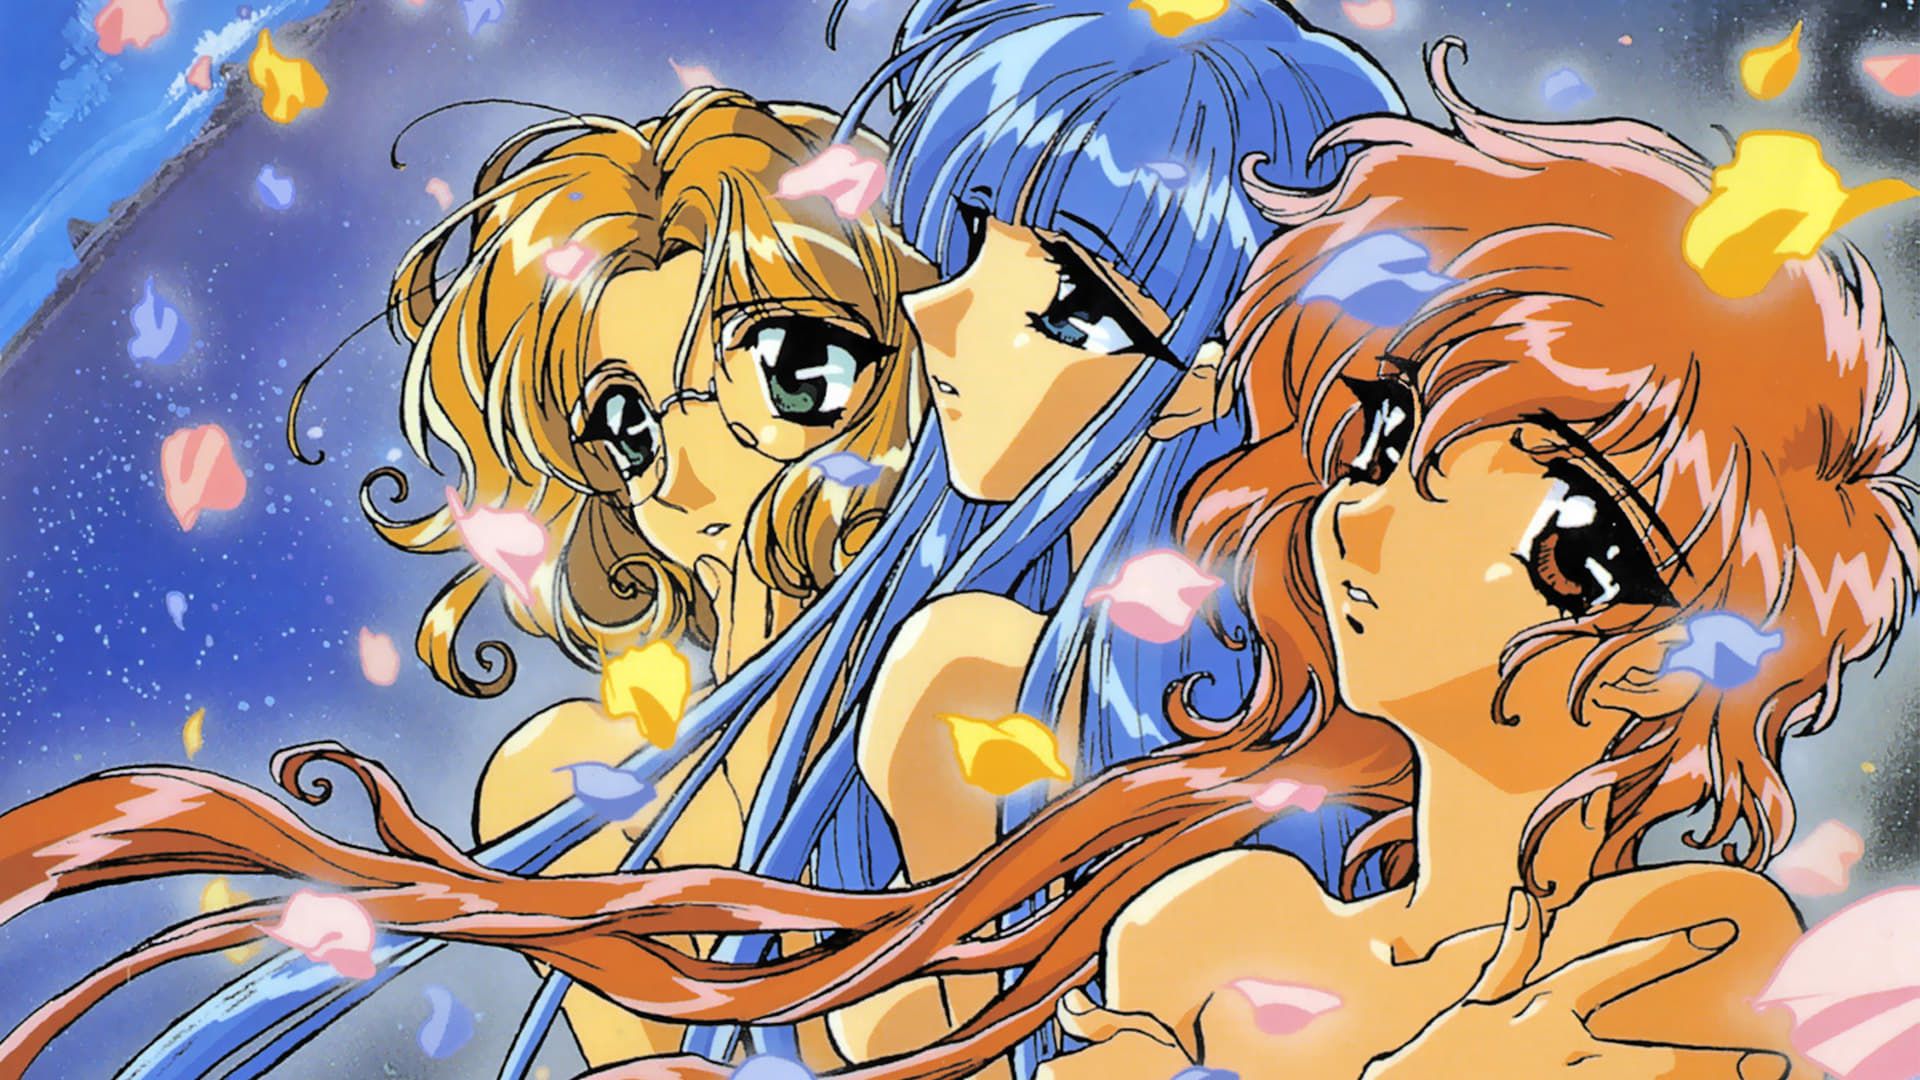 Magic Knight Rayearth, Ep 13 - The Most Valuable Thing in this World